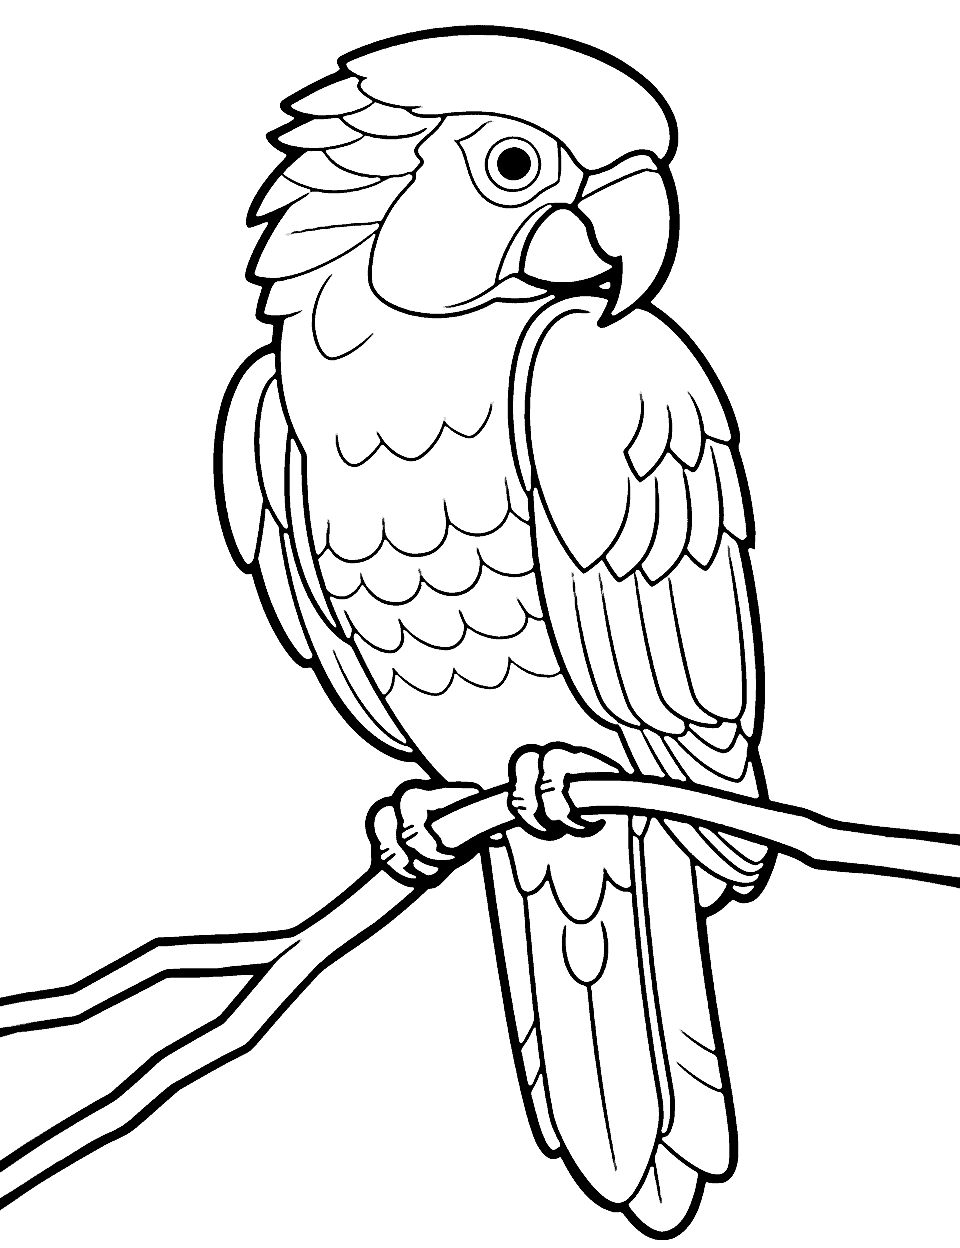 Colorful Macaw Animal Coloring Page - A vibrant macaw perched on a branch, showing off its colorful feathers.